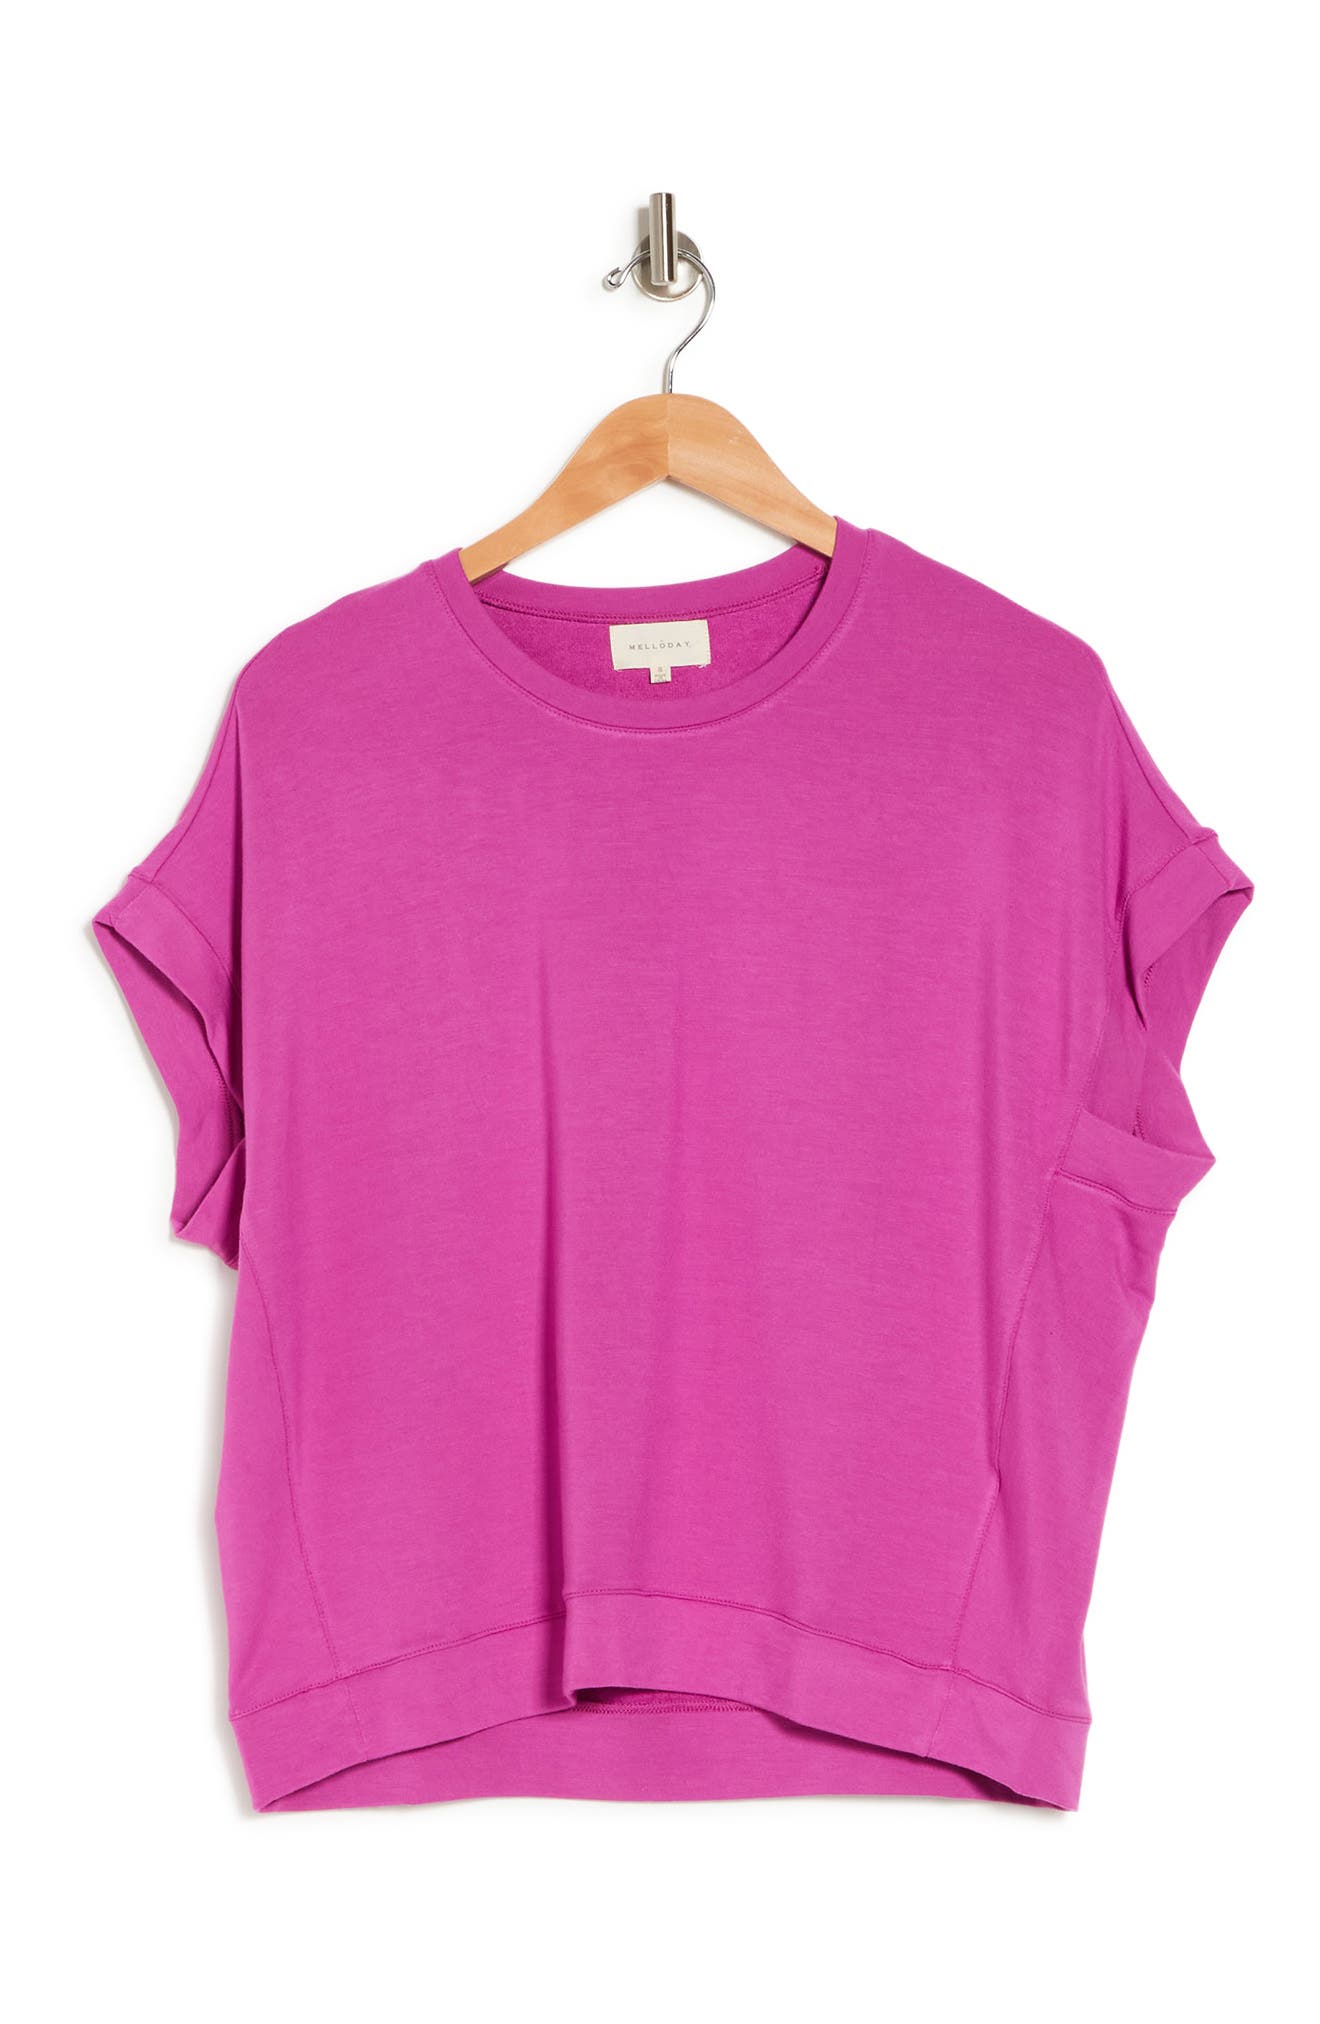 Melloday Solid Boxy Top In Magenta